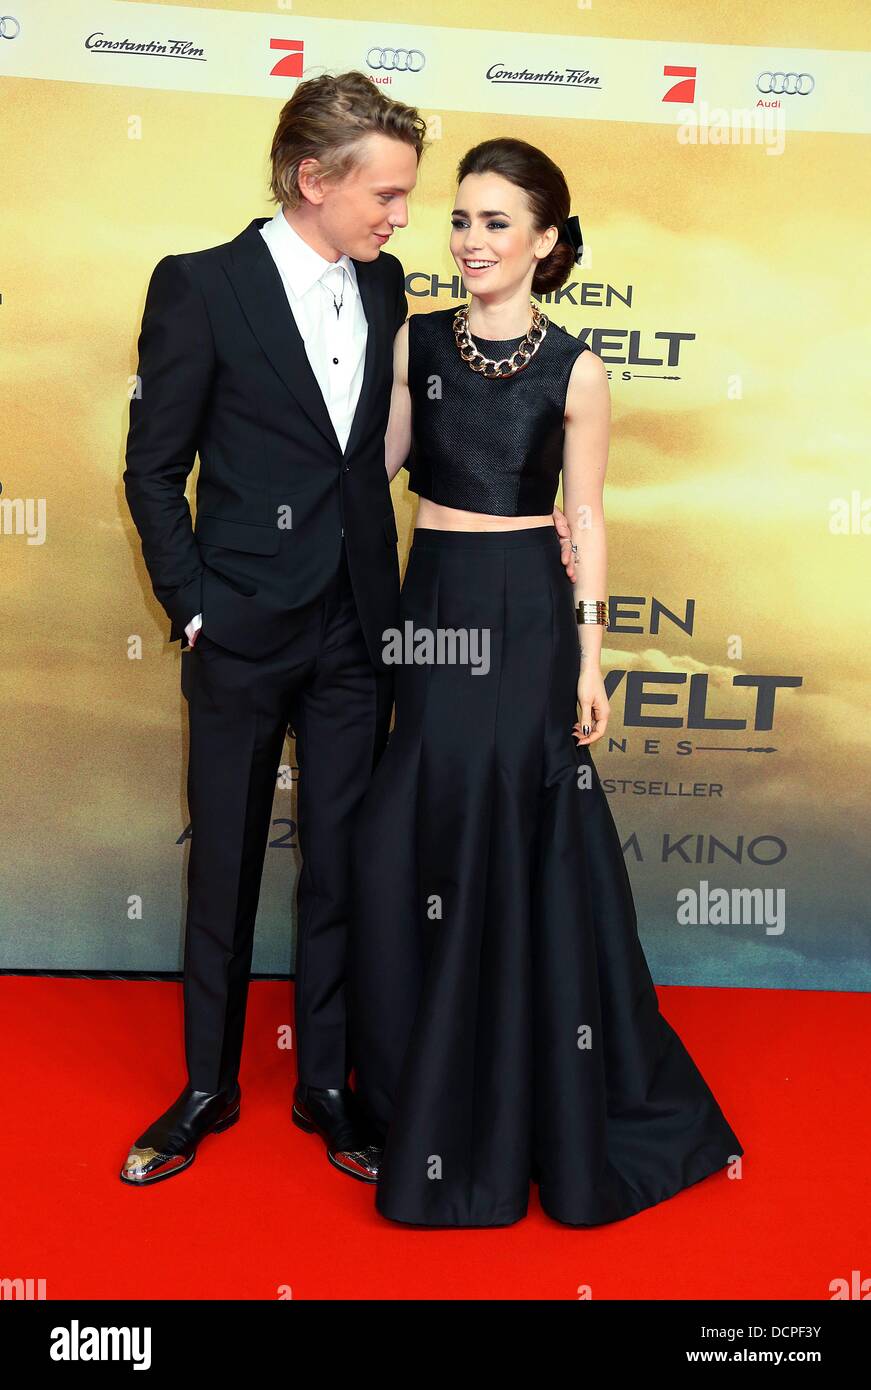 Berlin, Germany. 20th Aug, 2013. British actors Jamie Campbell Bower and Lily Collins attend to the premiere of their new movie 'The Mortal Instruments: City of Bones' at the Sony Center in Berlin, Germany, on August 20th, 2013. © dpa picture alliance/Alamy Live News Stock Photo